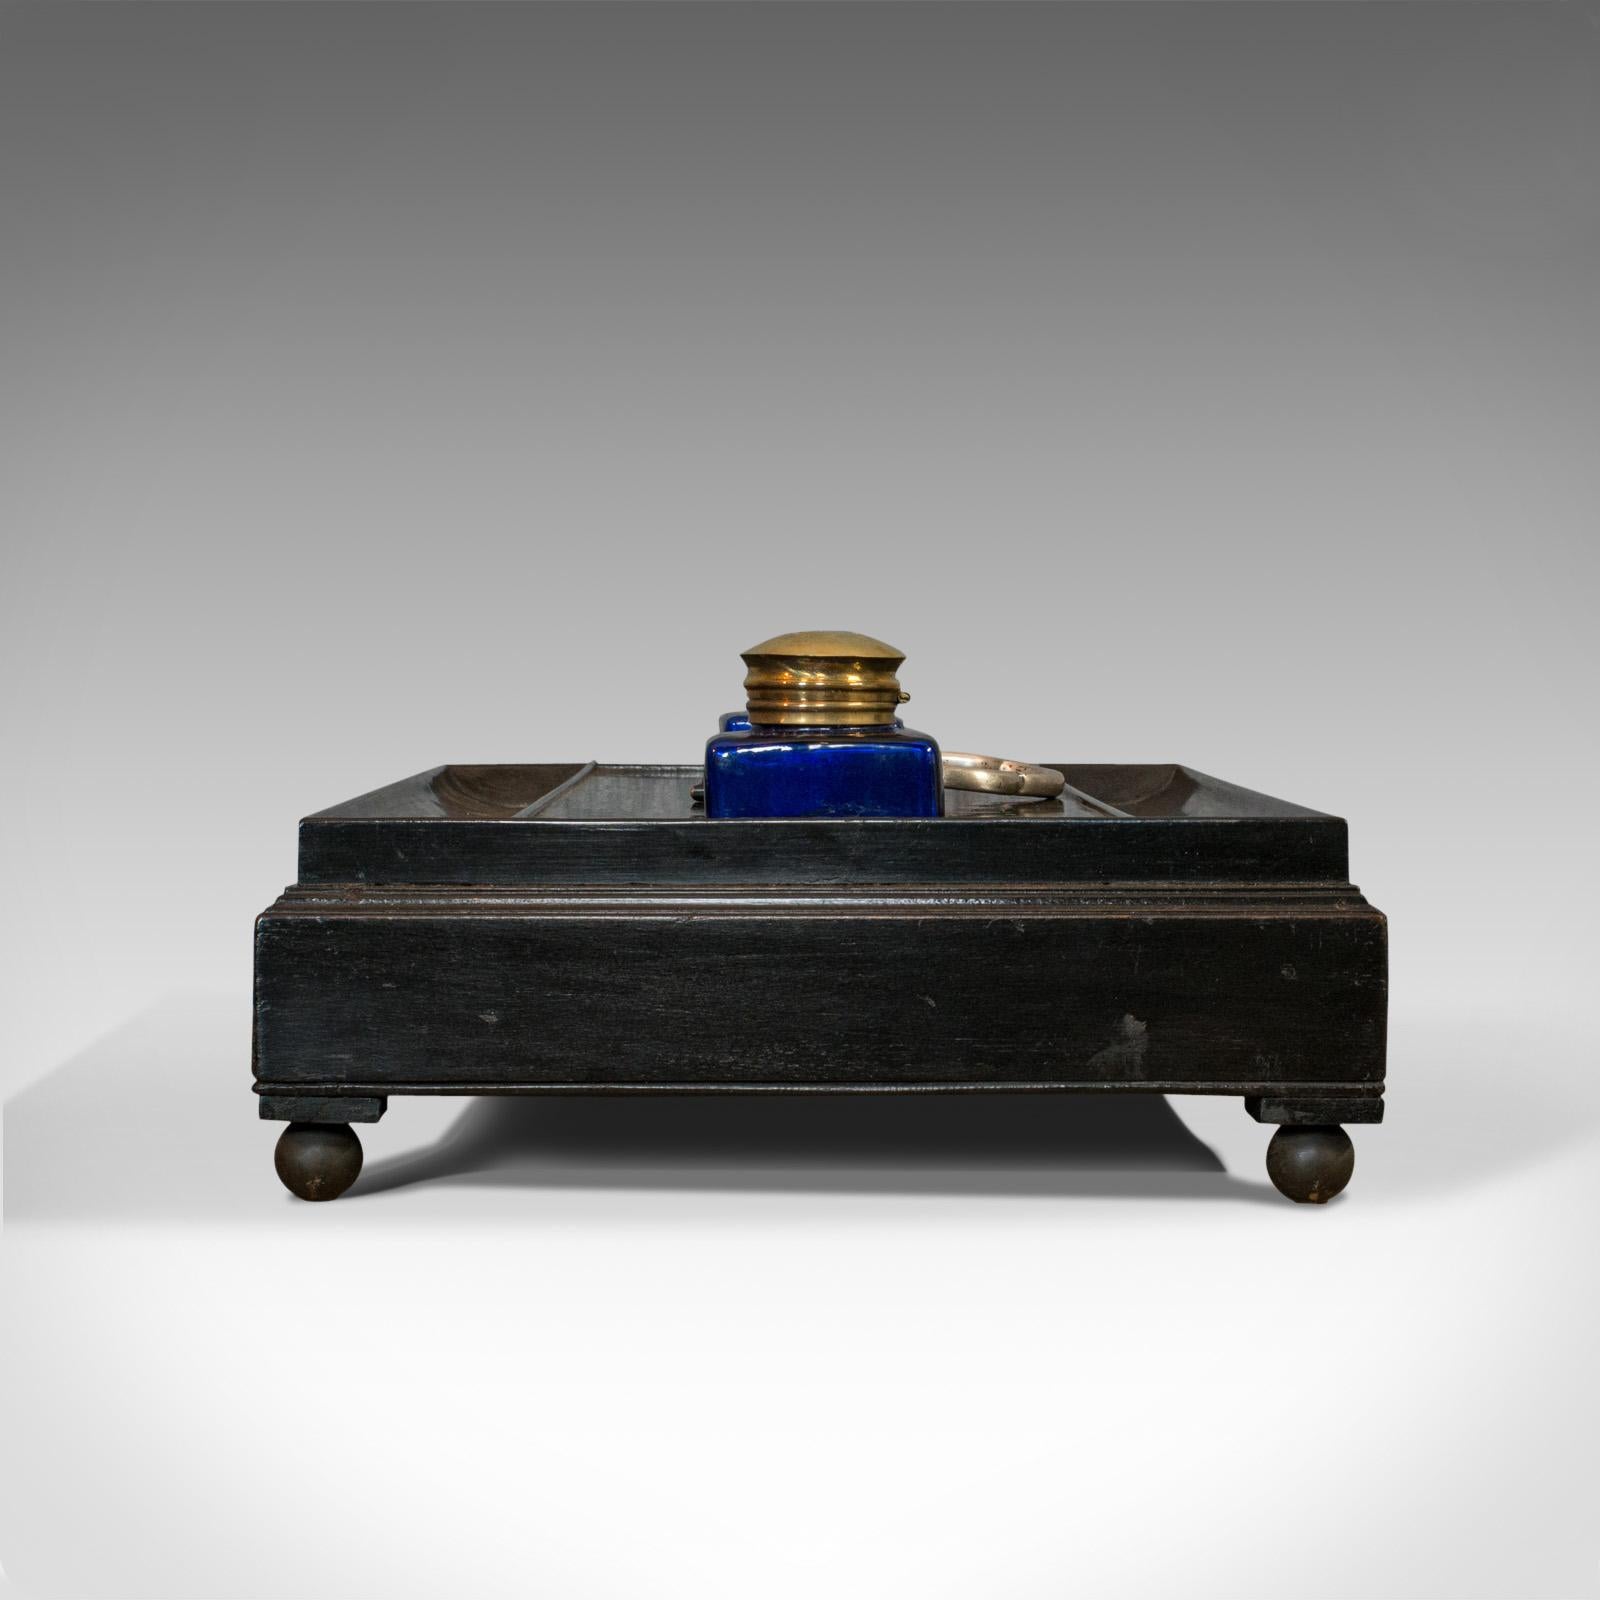 19th Century Antique Double Ink Well, English, Mahogany, Desk Tidy, Aesthetic Period, 1880